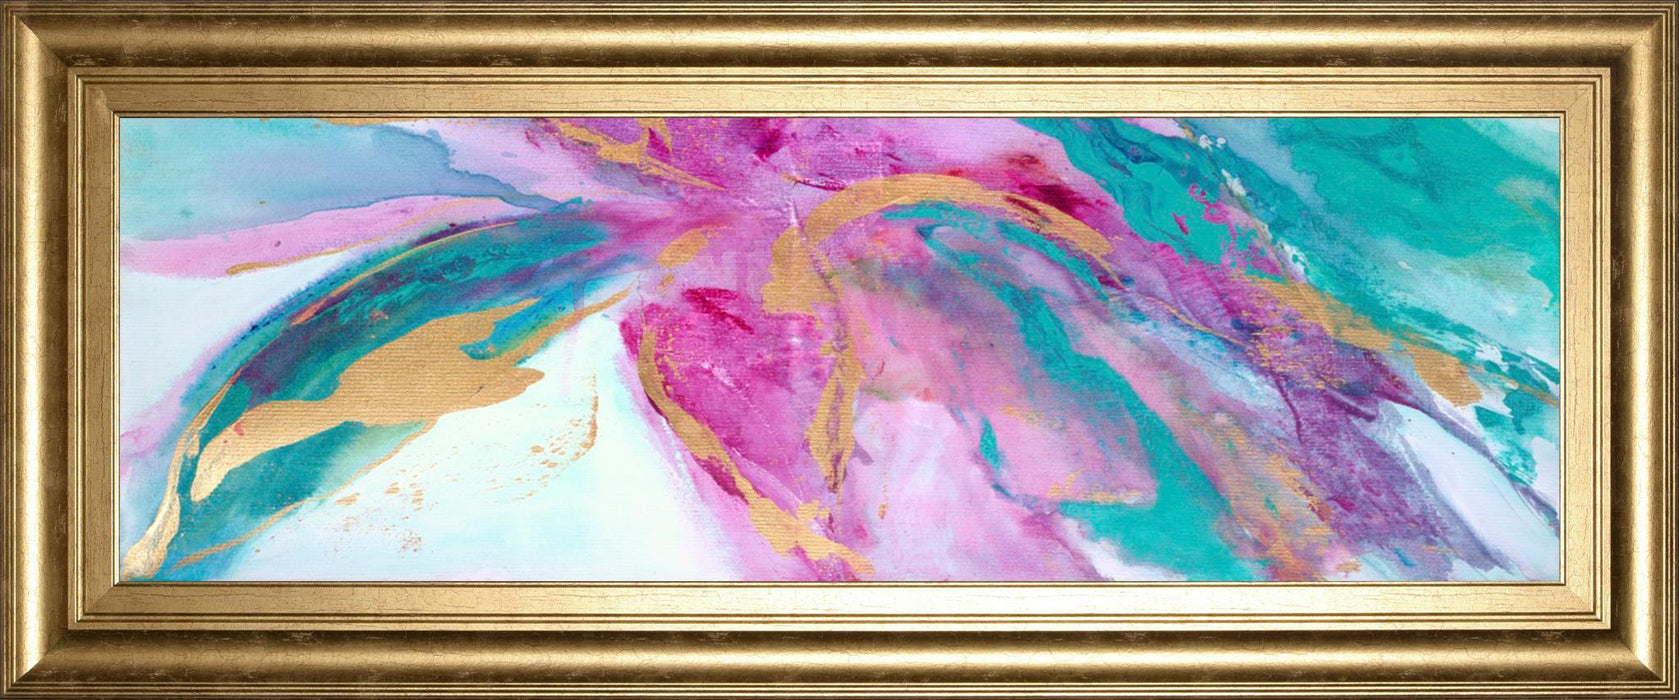 18x42 Magenta Colores II By Suzanne Wilkins - Purple